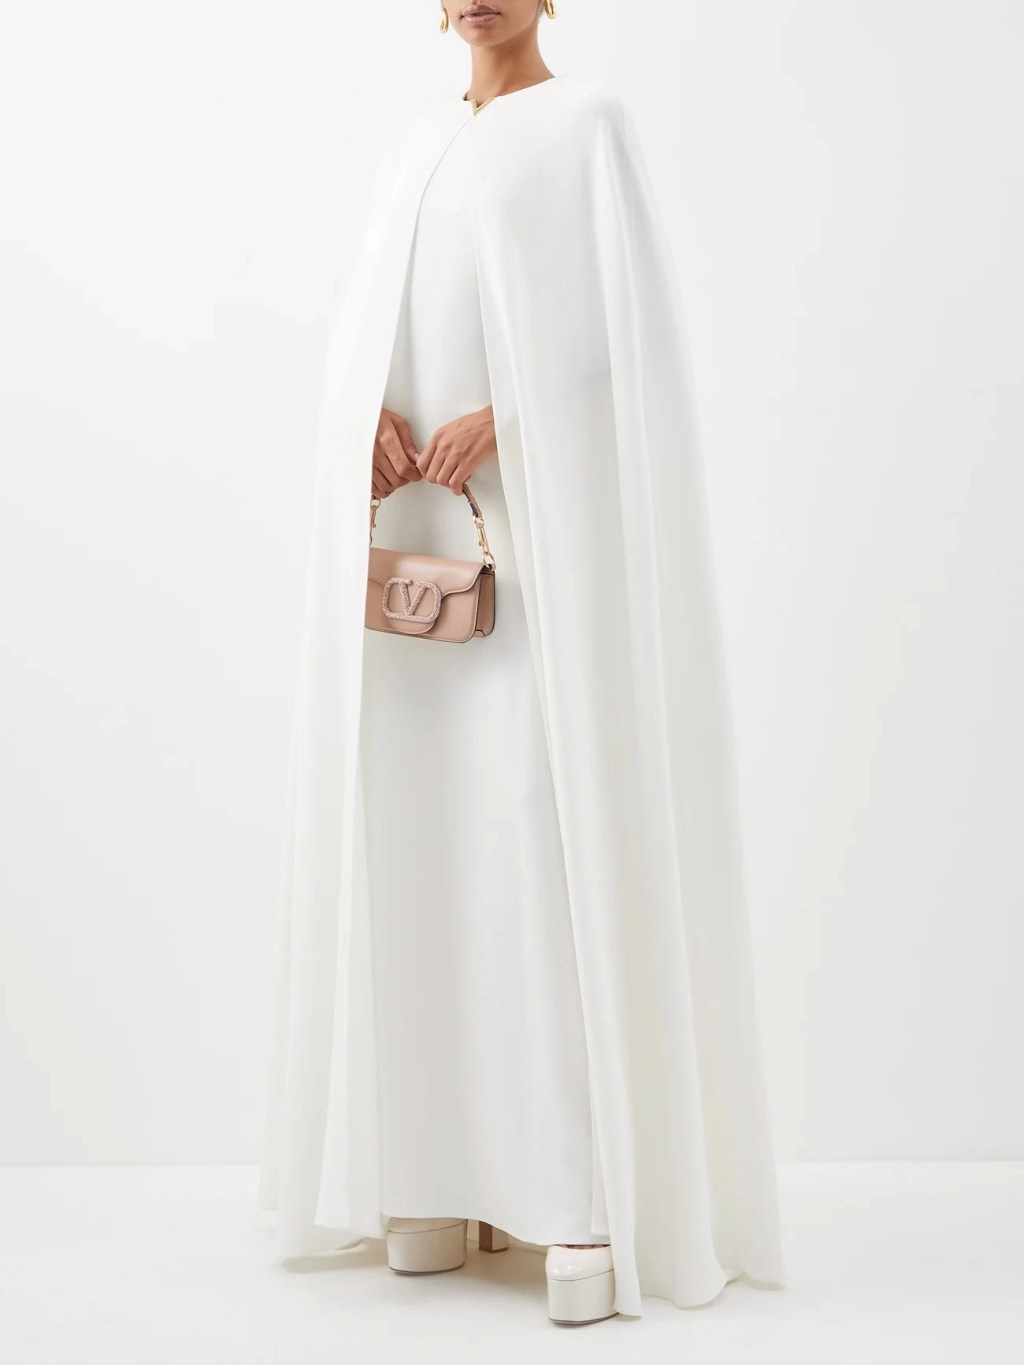 Cady Couture cape-overlay silk gown by Valentino